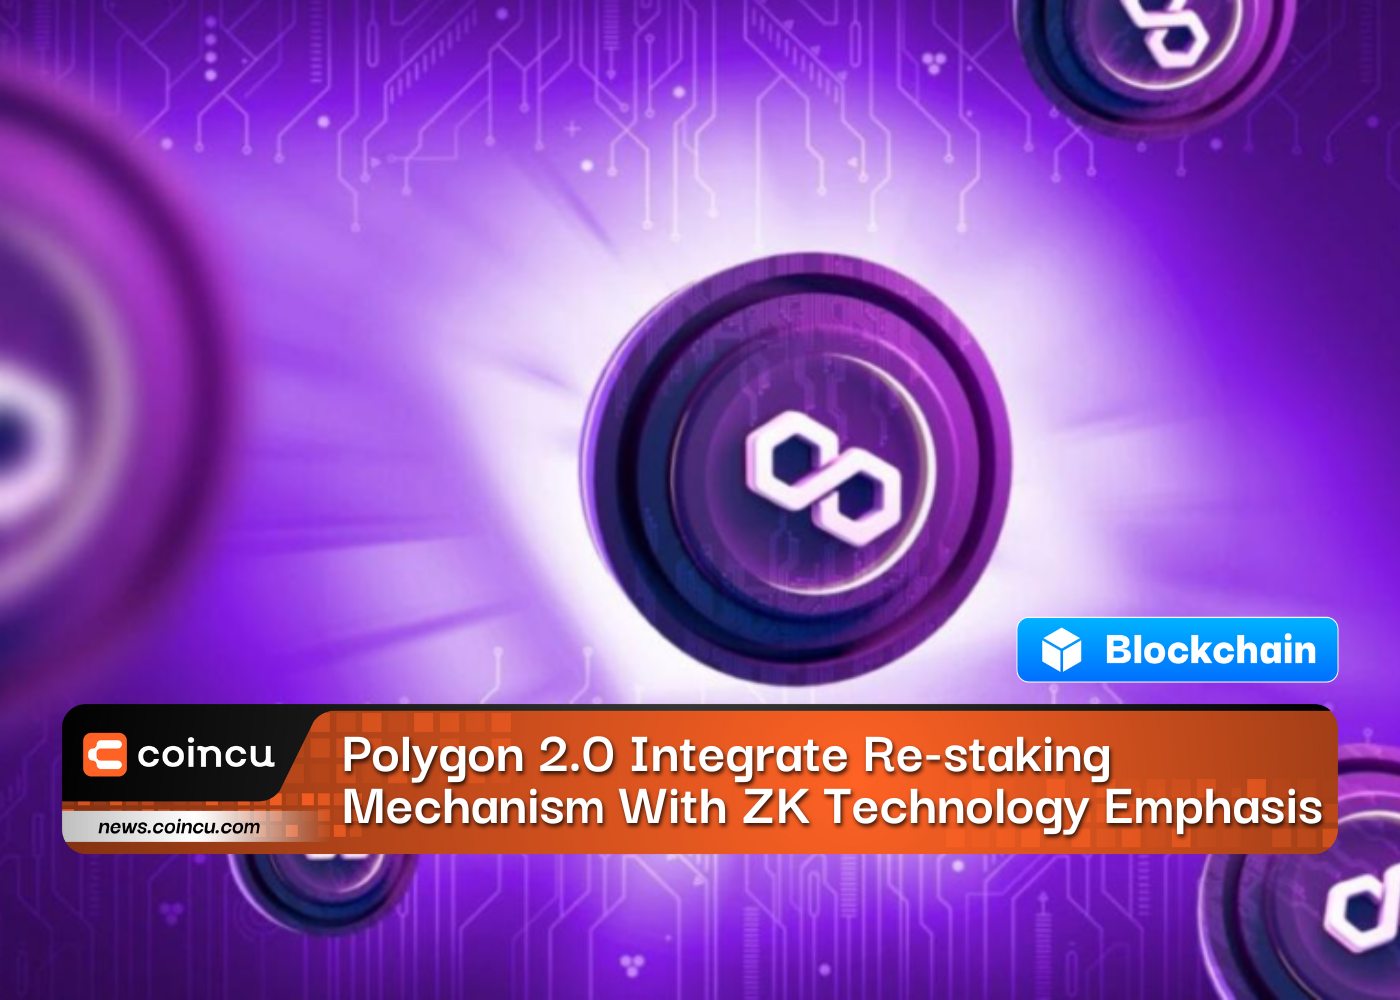 Polygon 2.0 Integrate Re-staking Mechanism With ZK Technology Emphasis